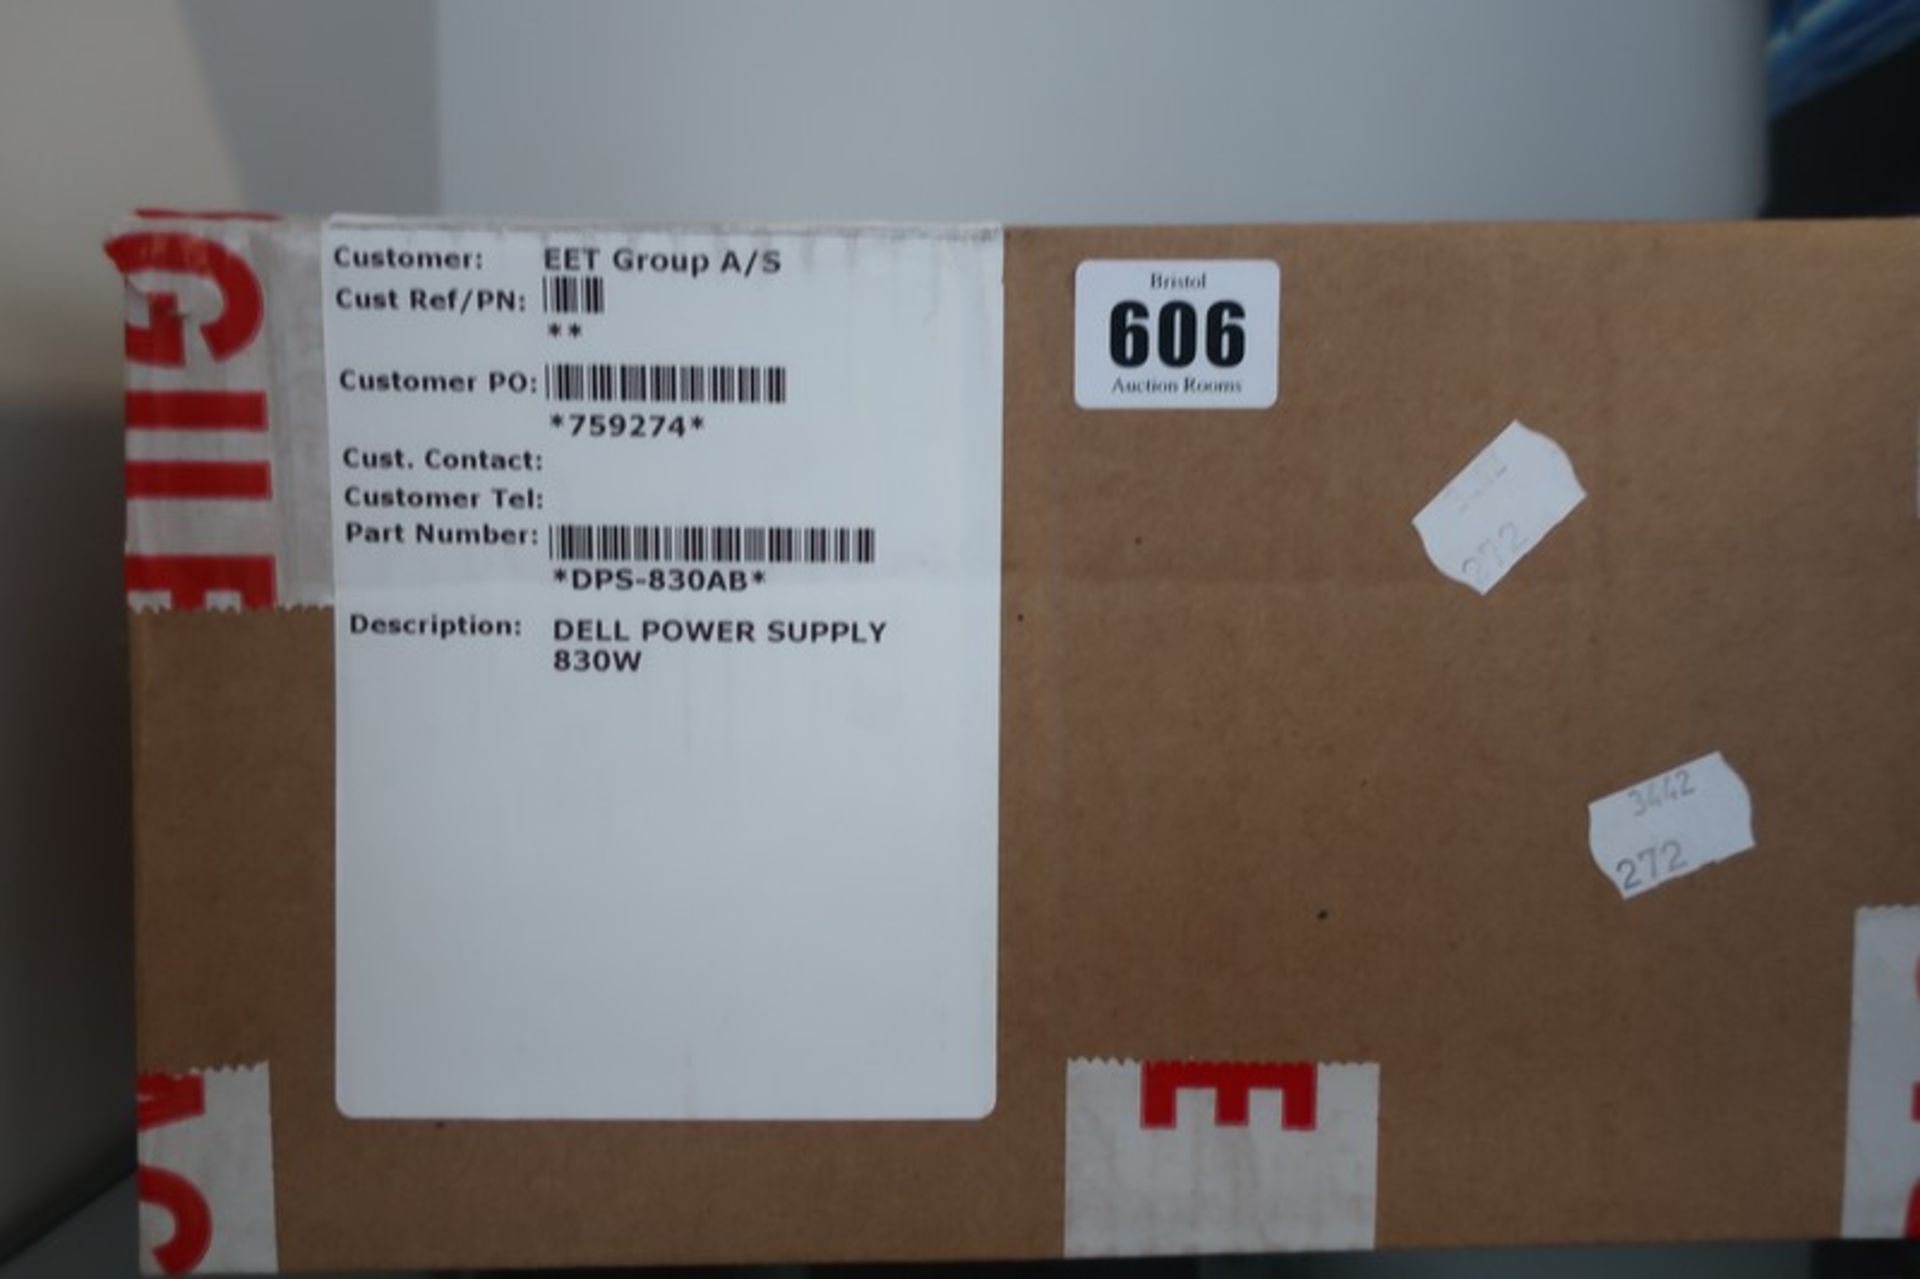 A boxed as new Dell Power Supply 830W DPS-830AB (Box opened for display purposes).